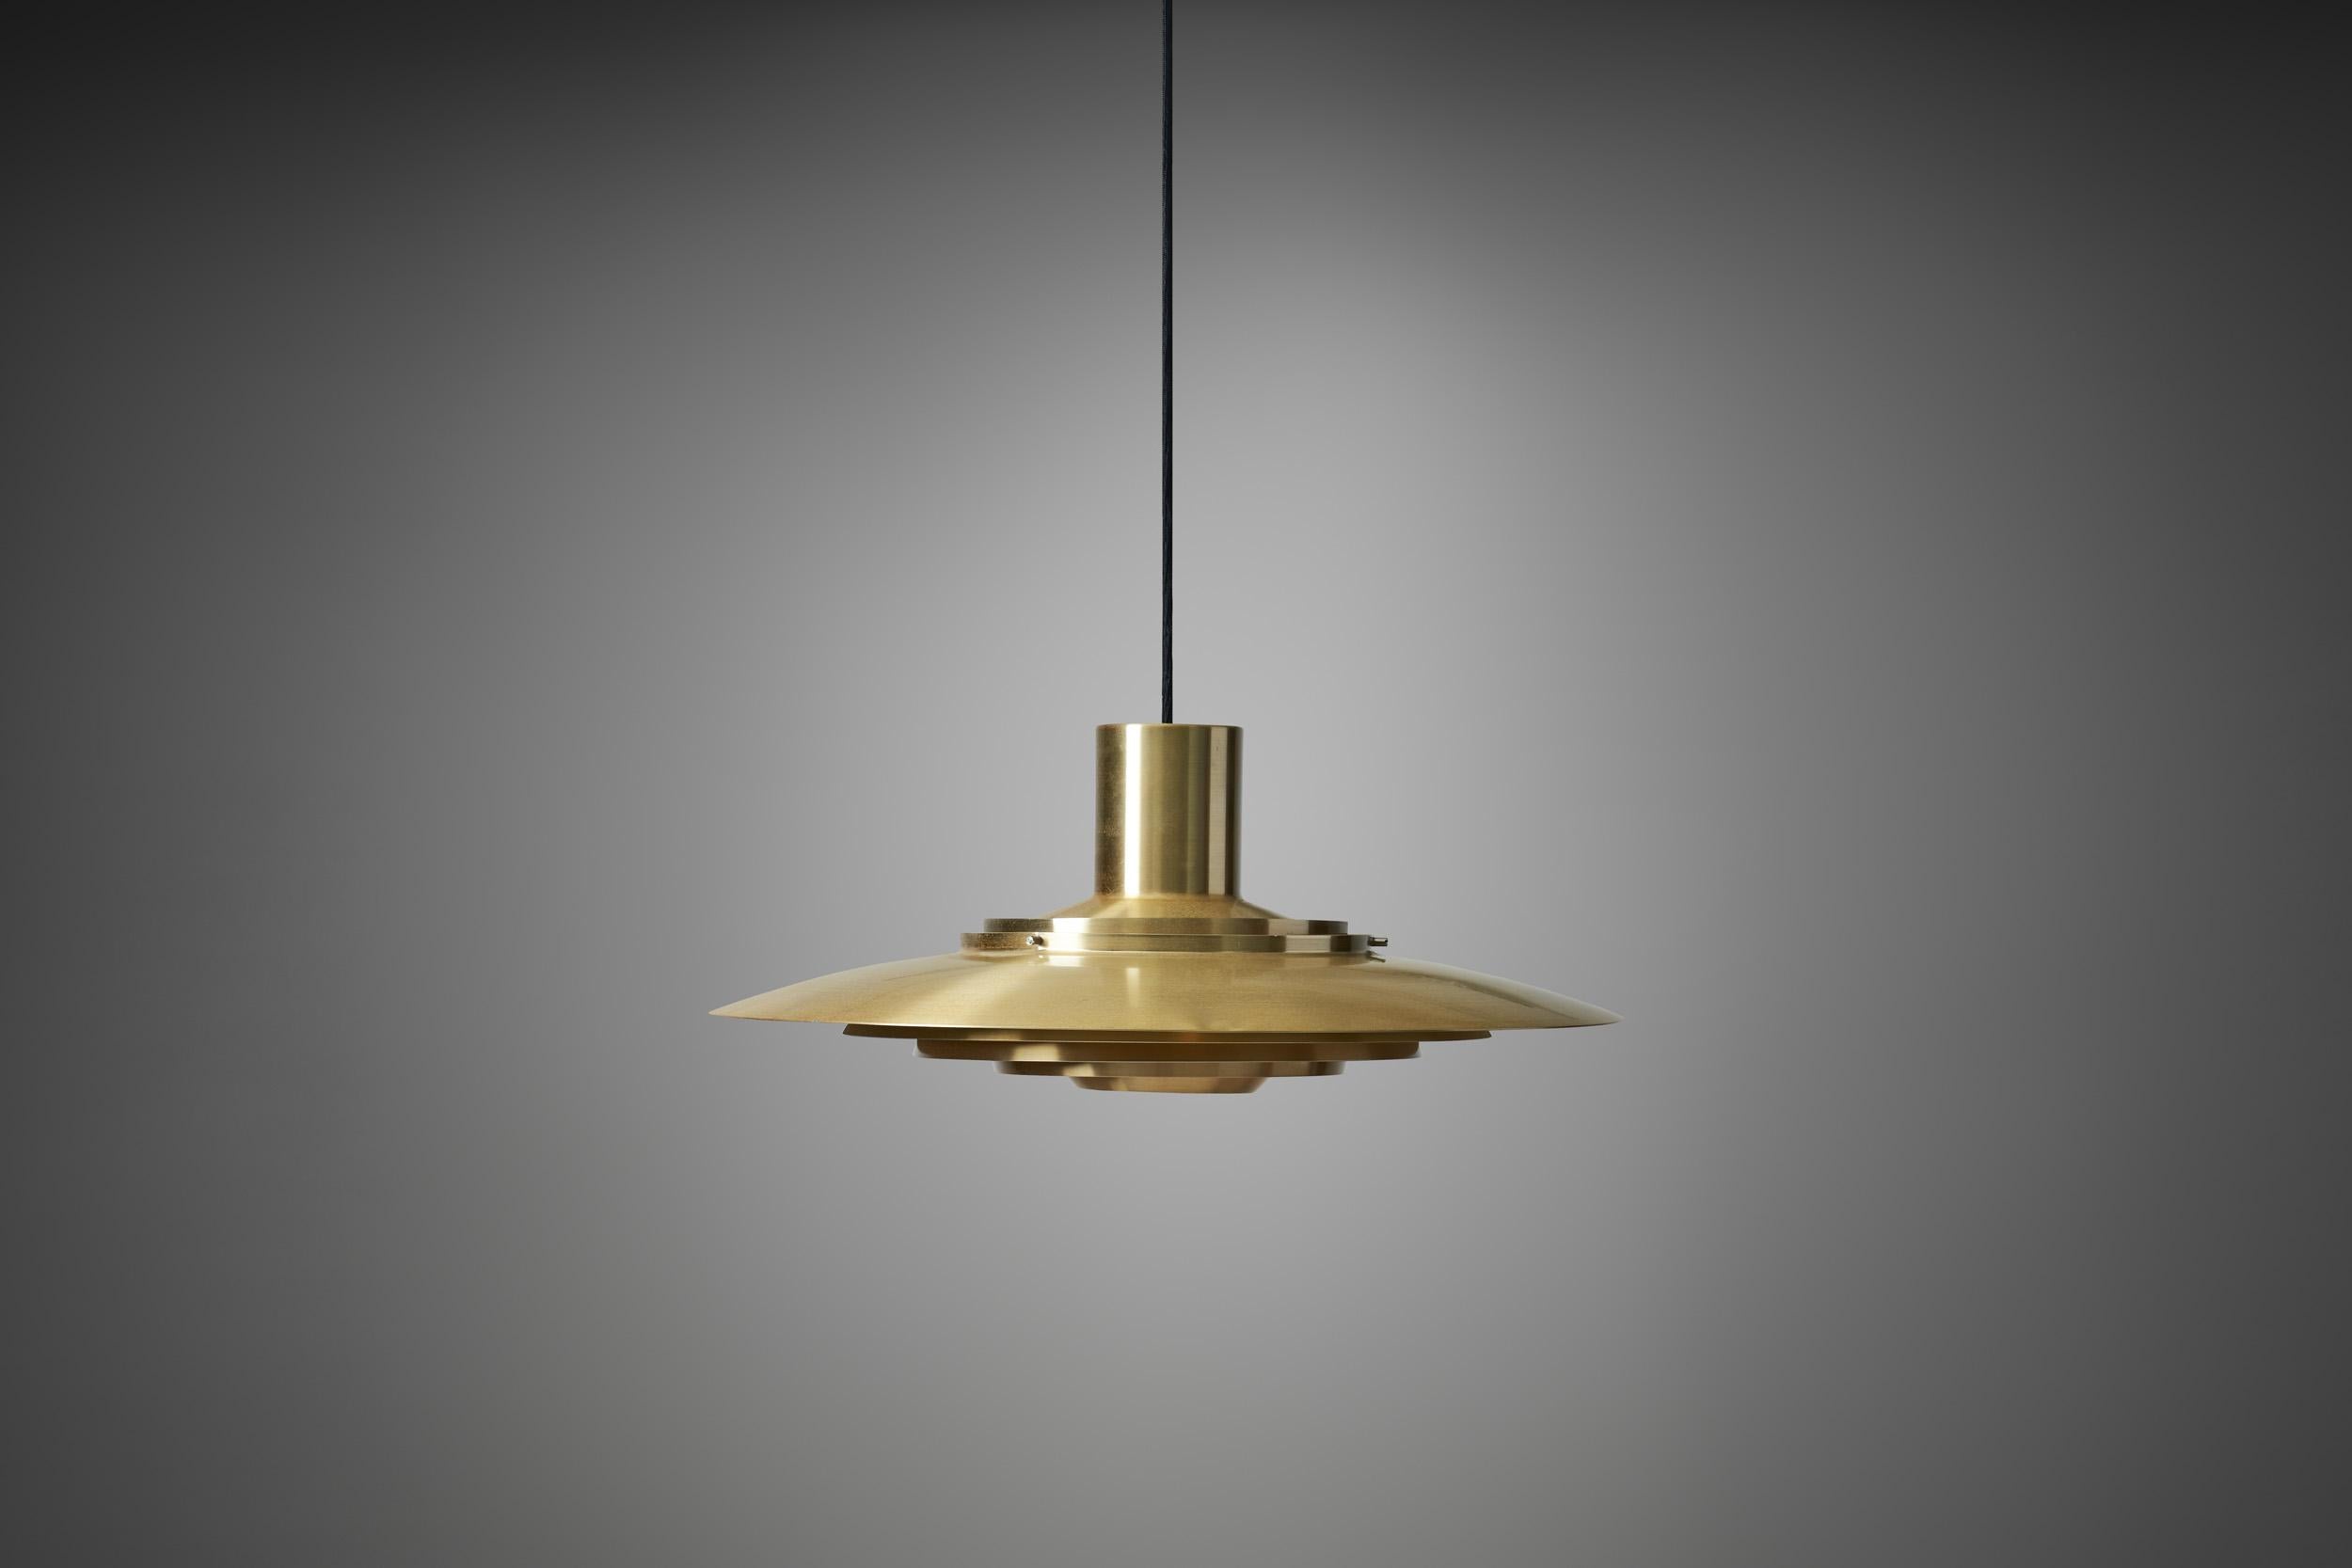 The two Danish designers, Preben Juhl Fabricius and Jørgen Kastholm agreed upon the design philosophy of “perfection, aesthetics and minimization”. Their most famous lighting design, the “P376 KF1” pendant light designed in 1963 is the physical